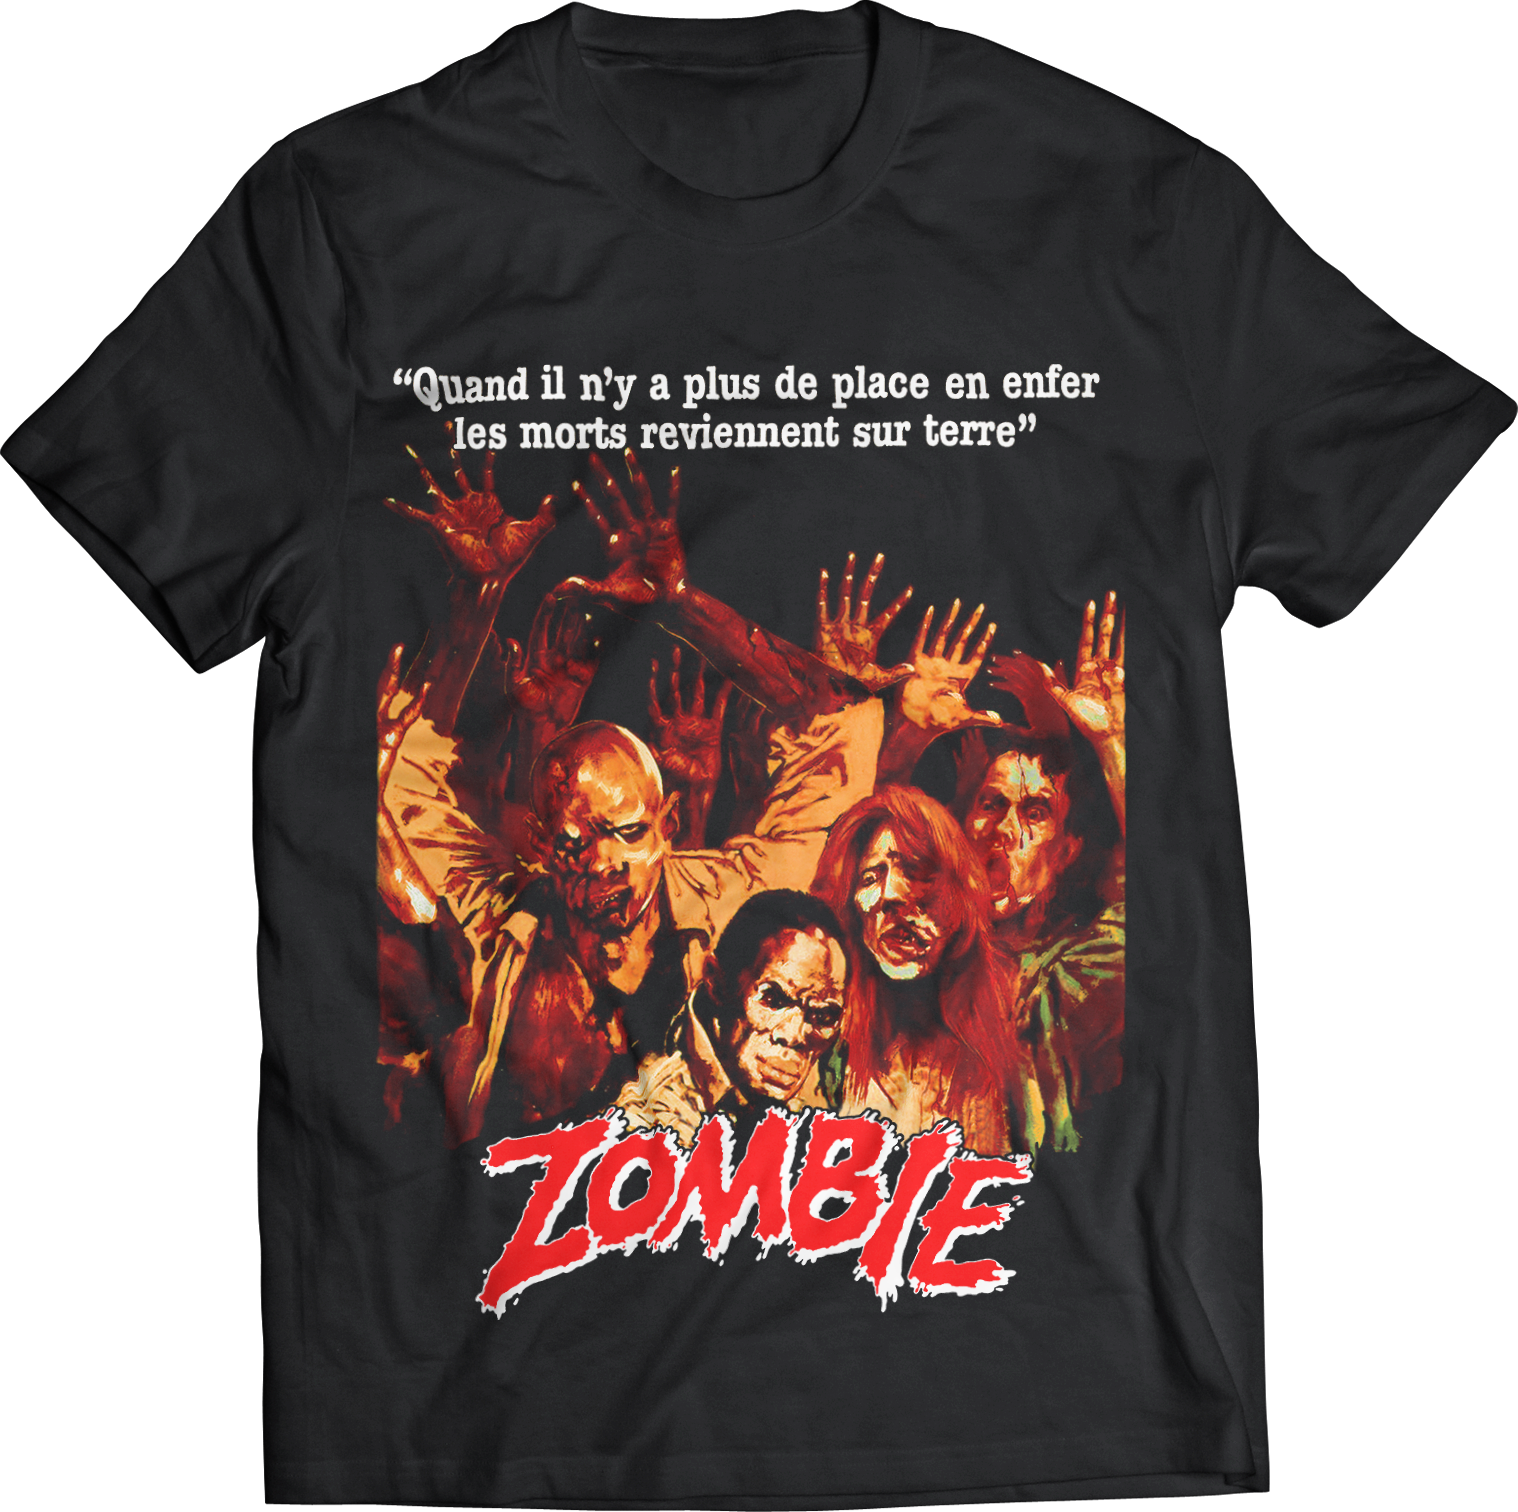 DARIO ARGENTO "ZOMBIE" FRENCH POSTER T-SHIRT